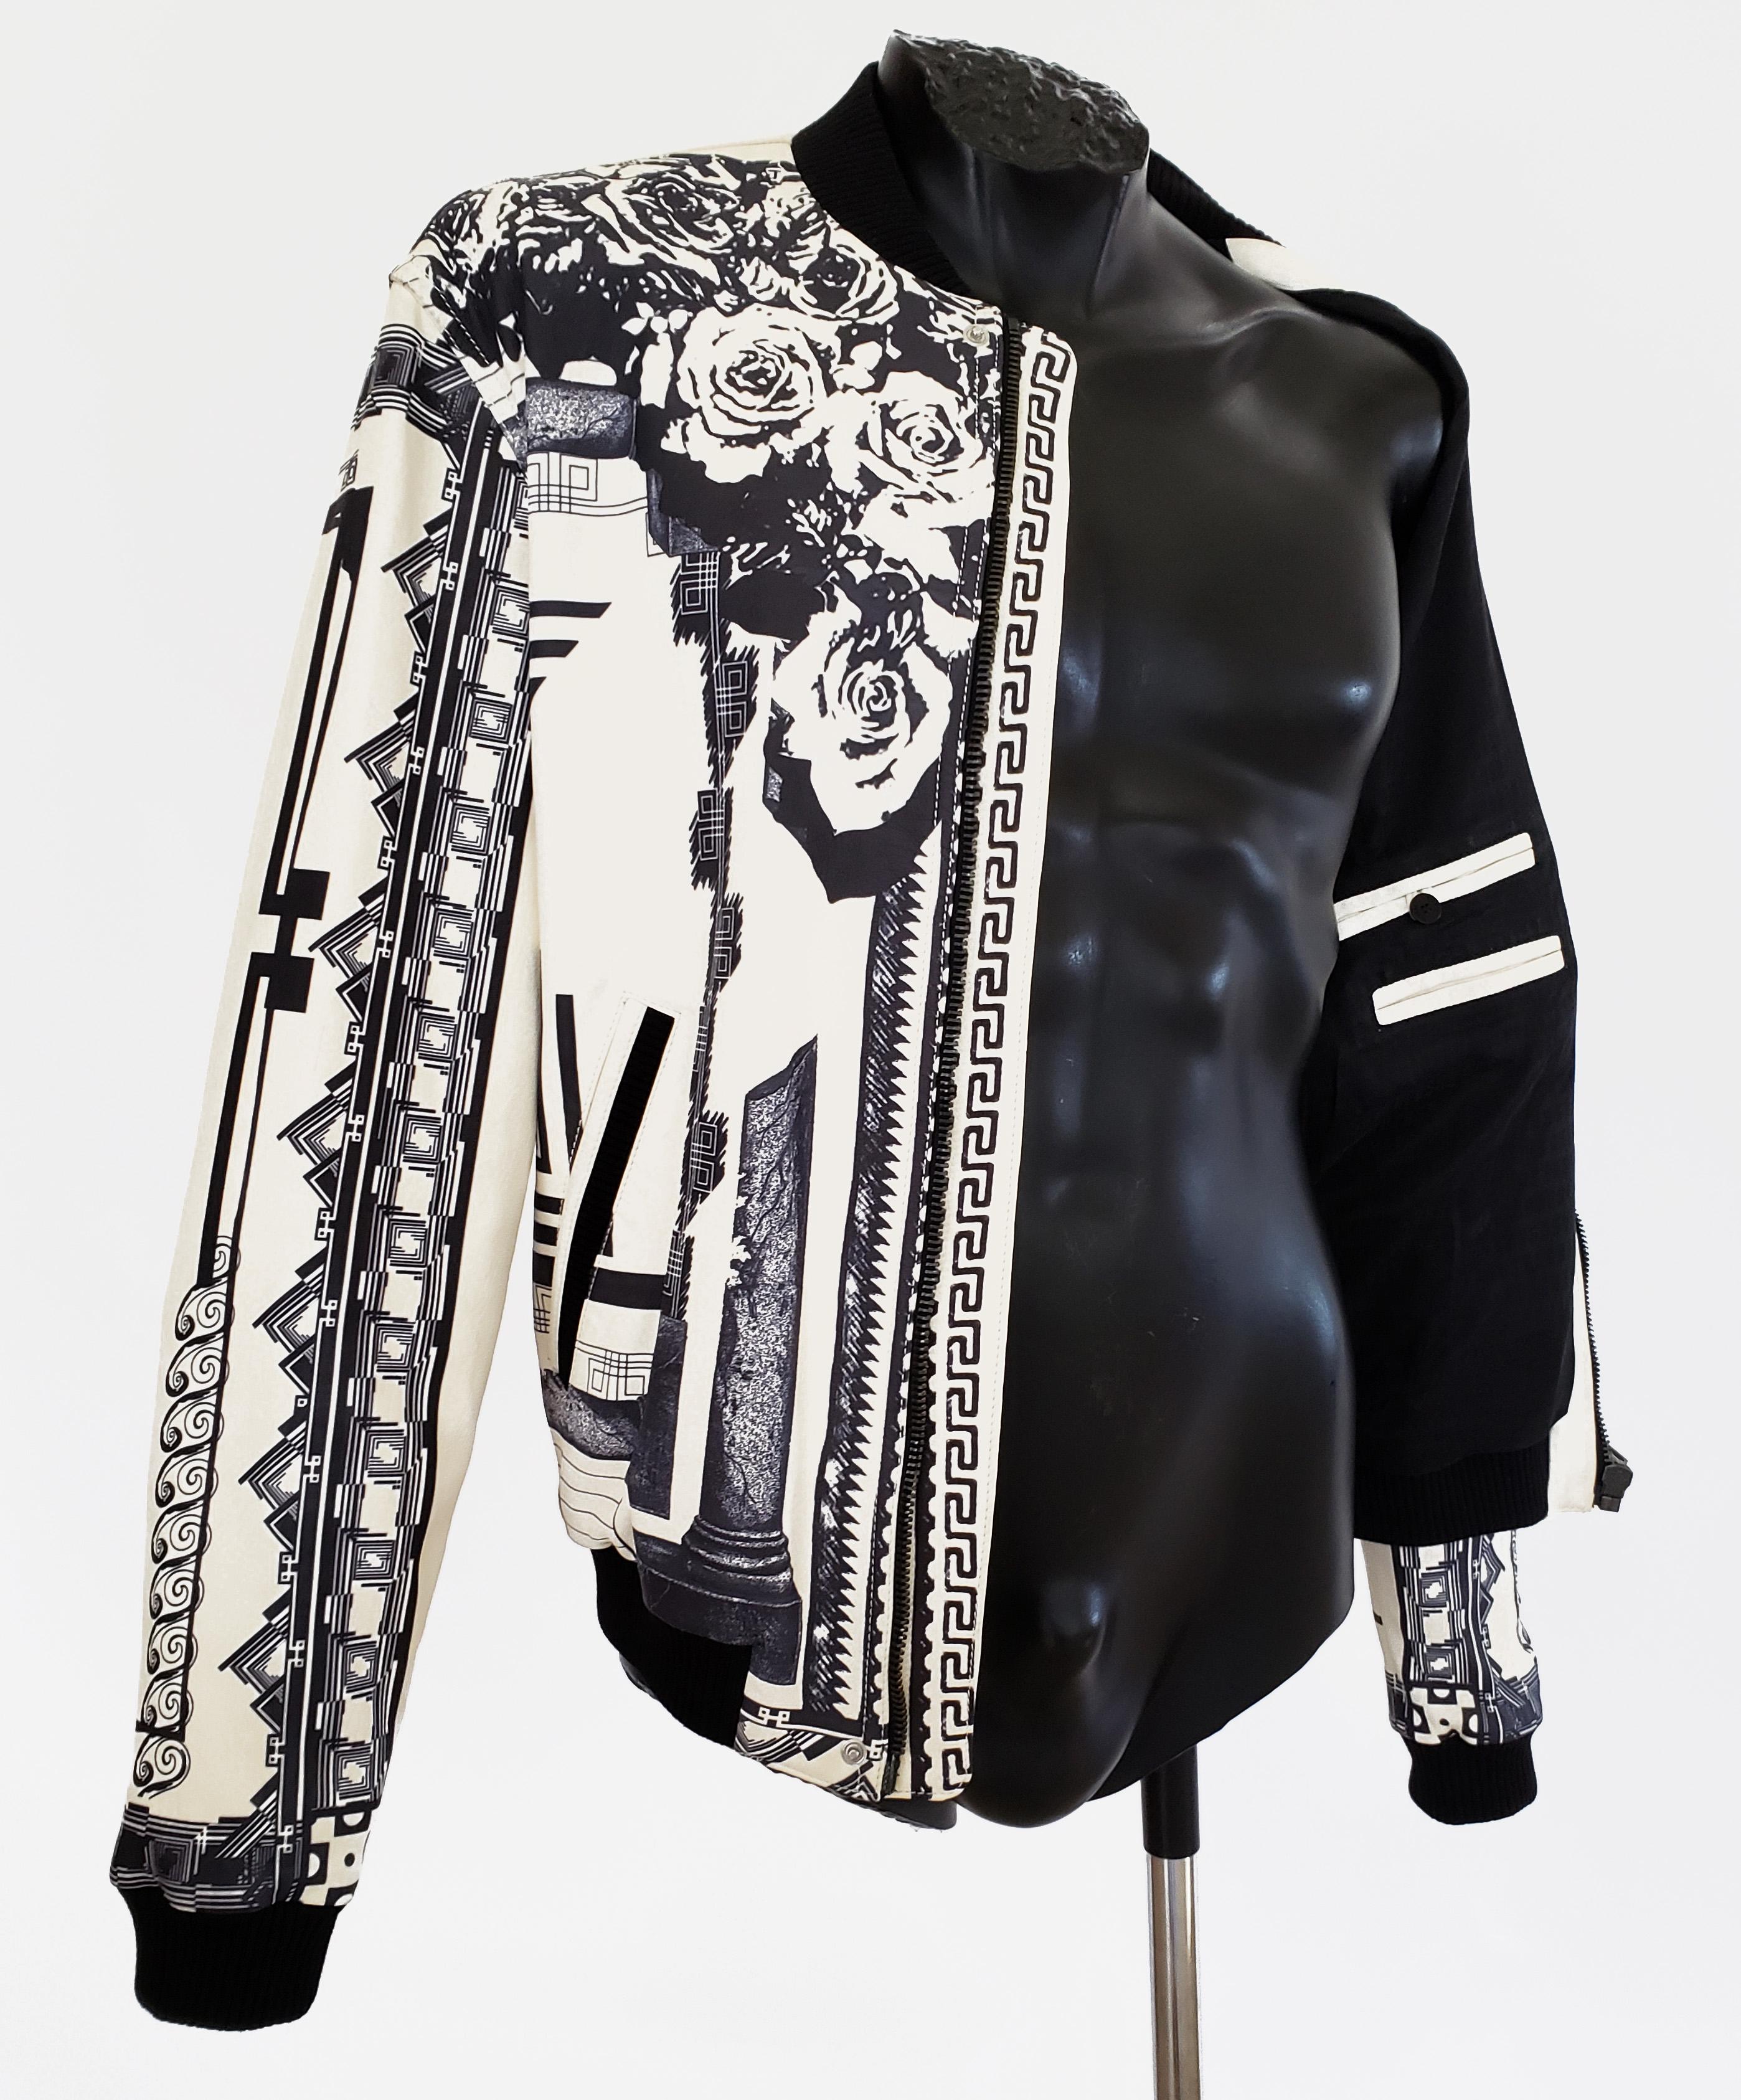 Versus Versace + Anthony Vaccarello Tattoo Leather Bomber Jacket 48 - 38 For Sale 4